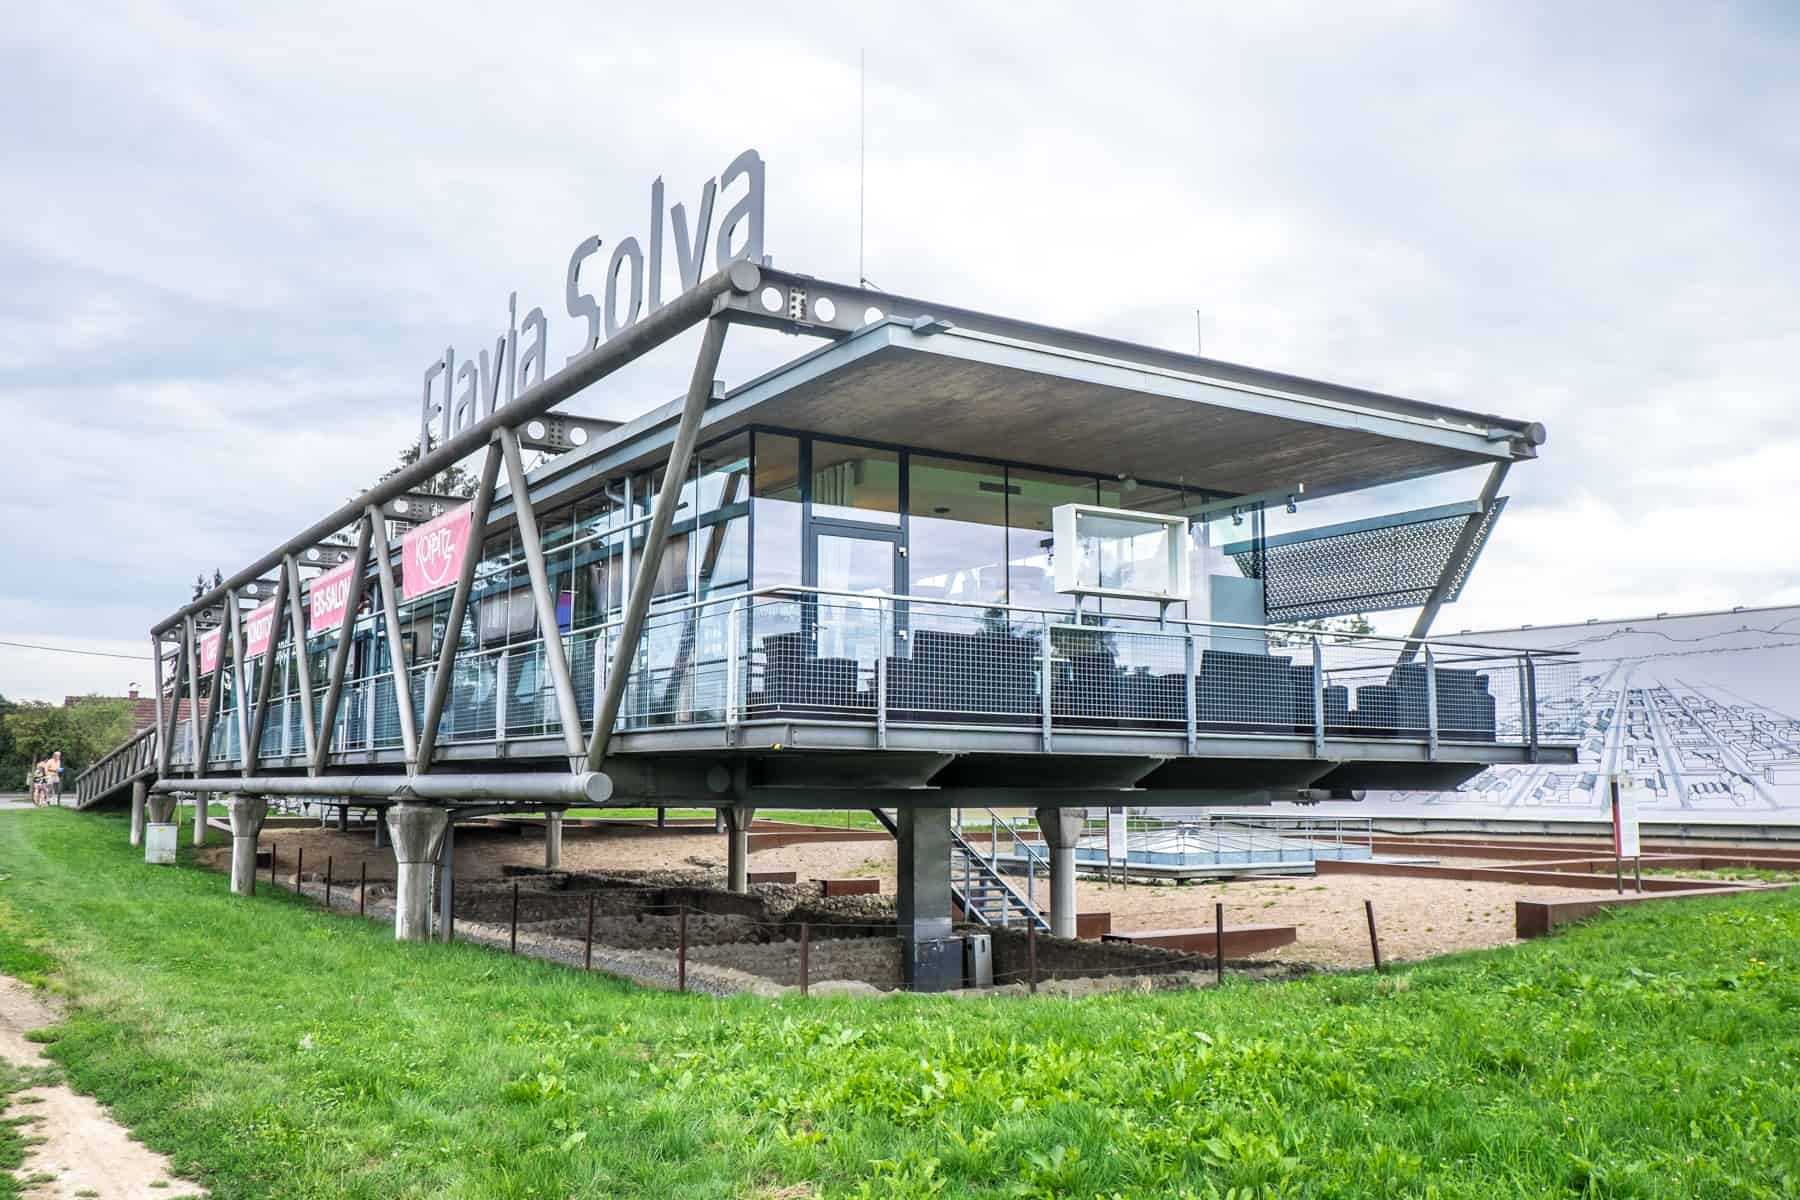 A modern glass fronted cafe and museum at the excavation site of Flavia Solva in South Styria, Austria